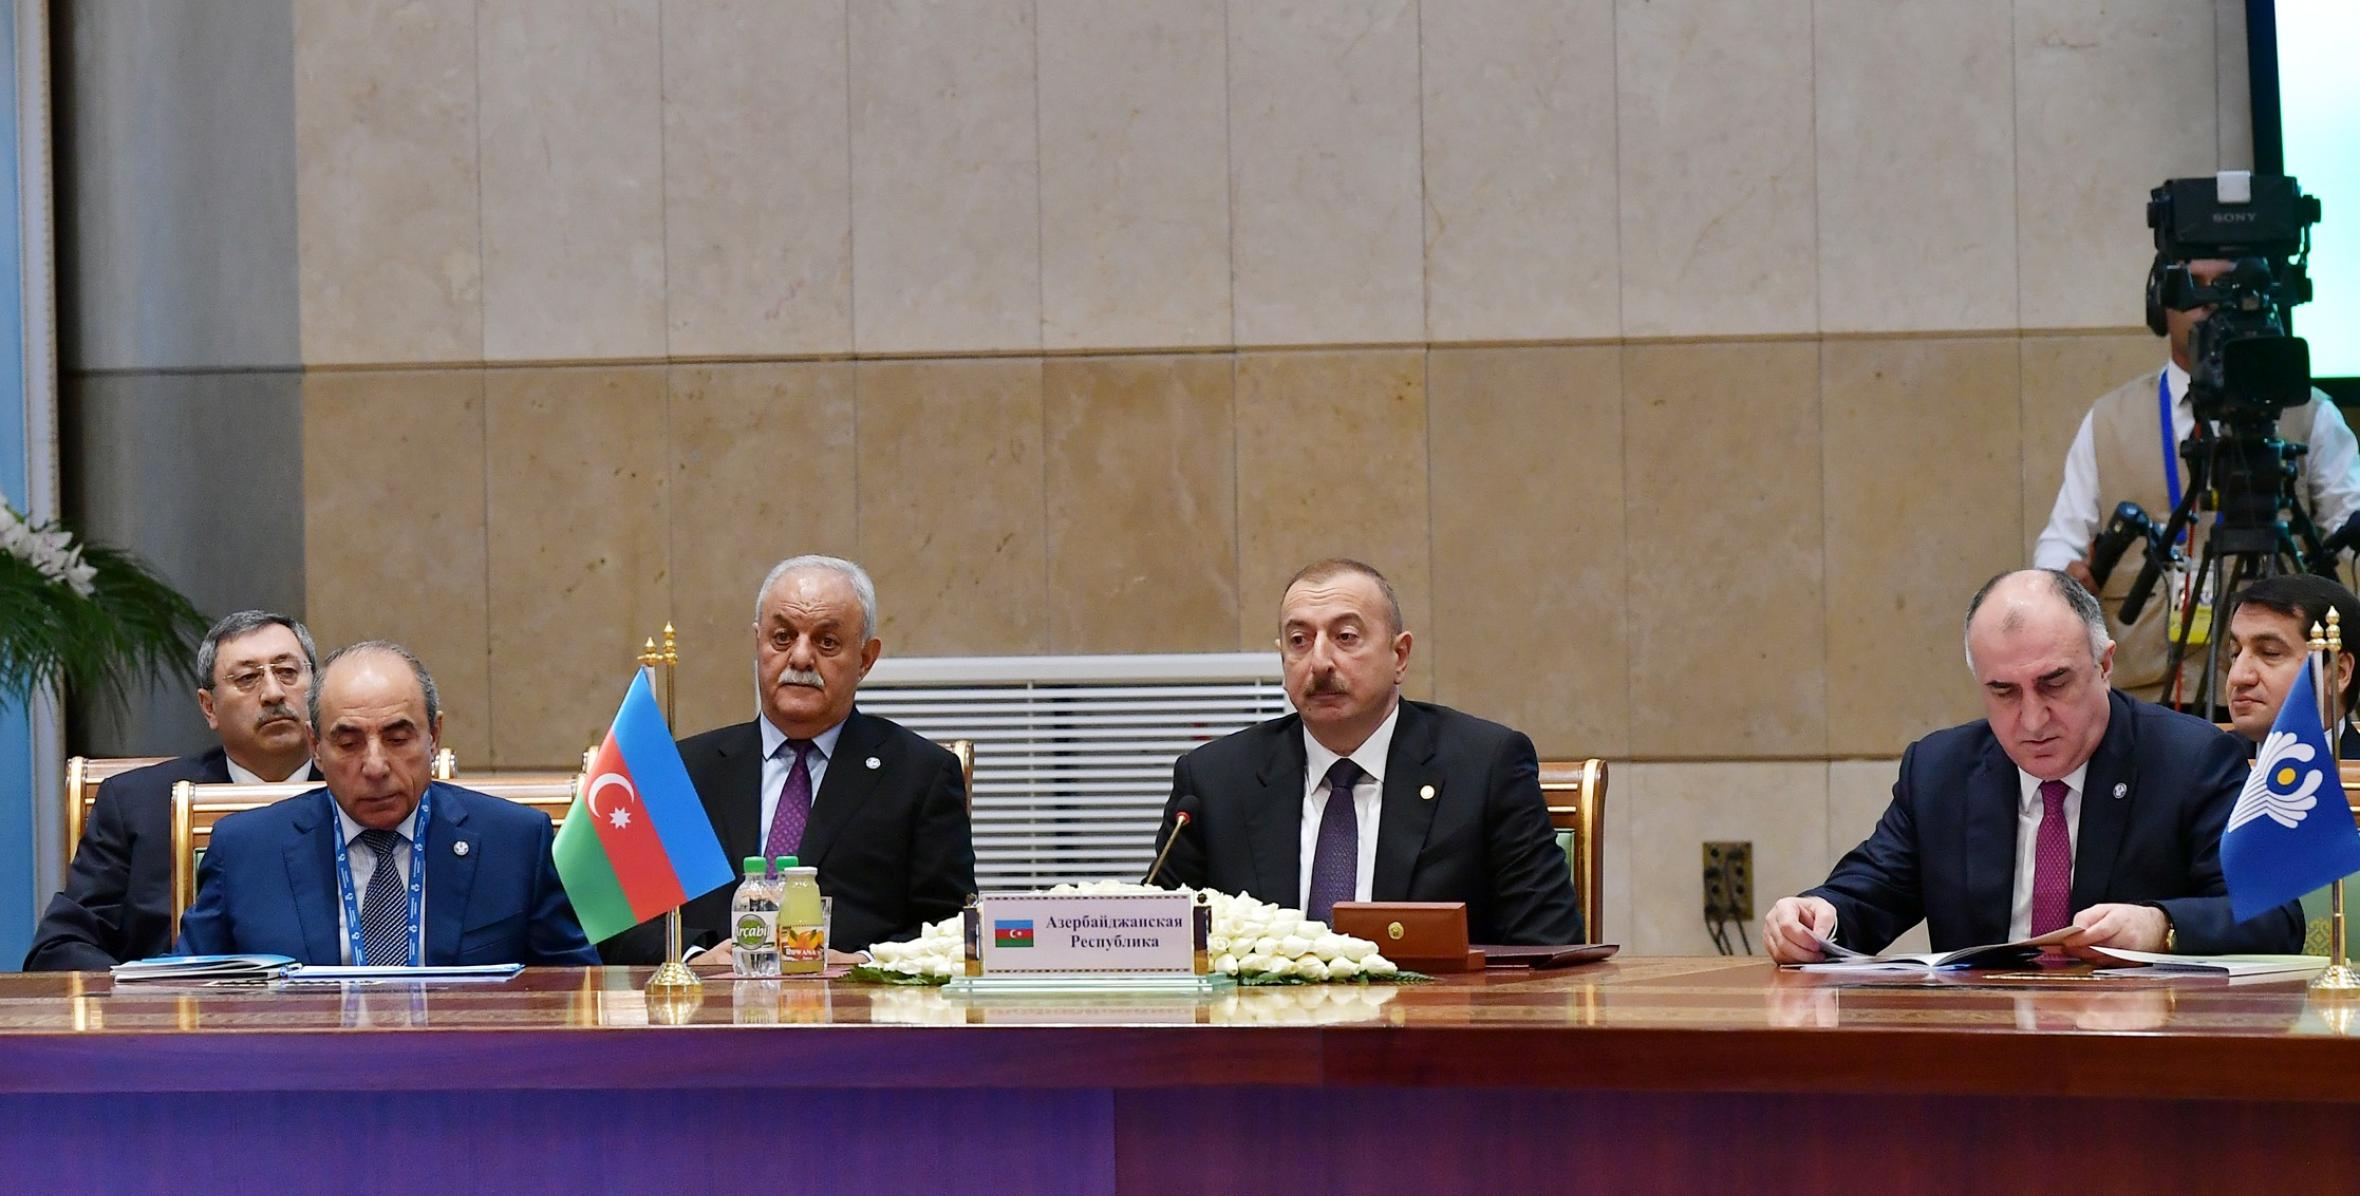 Ilham Aliyev attended expanded session of Council of CIS Heads of State in Ashgabat